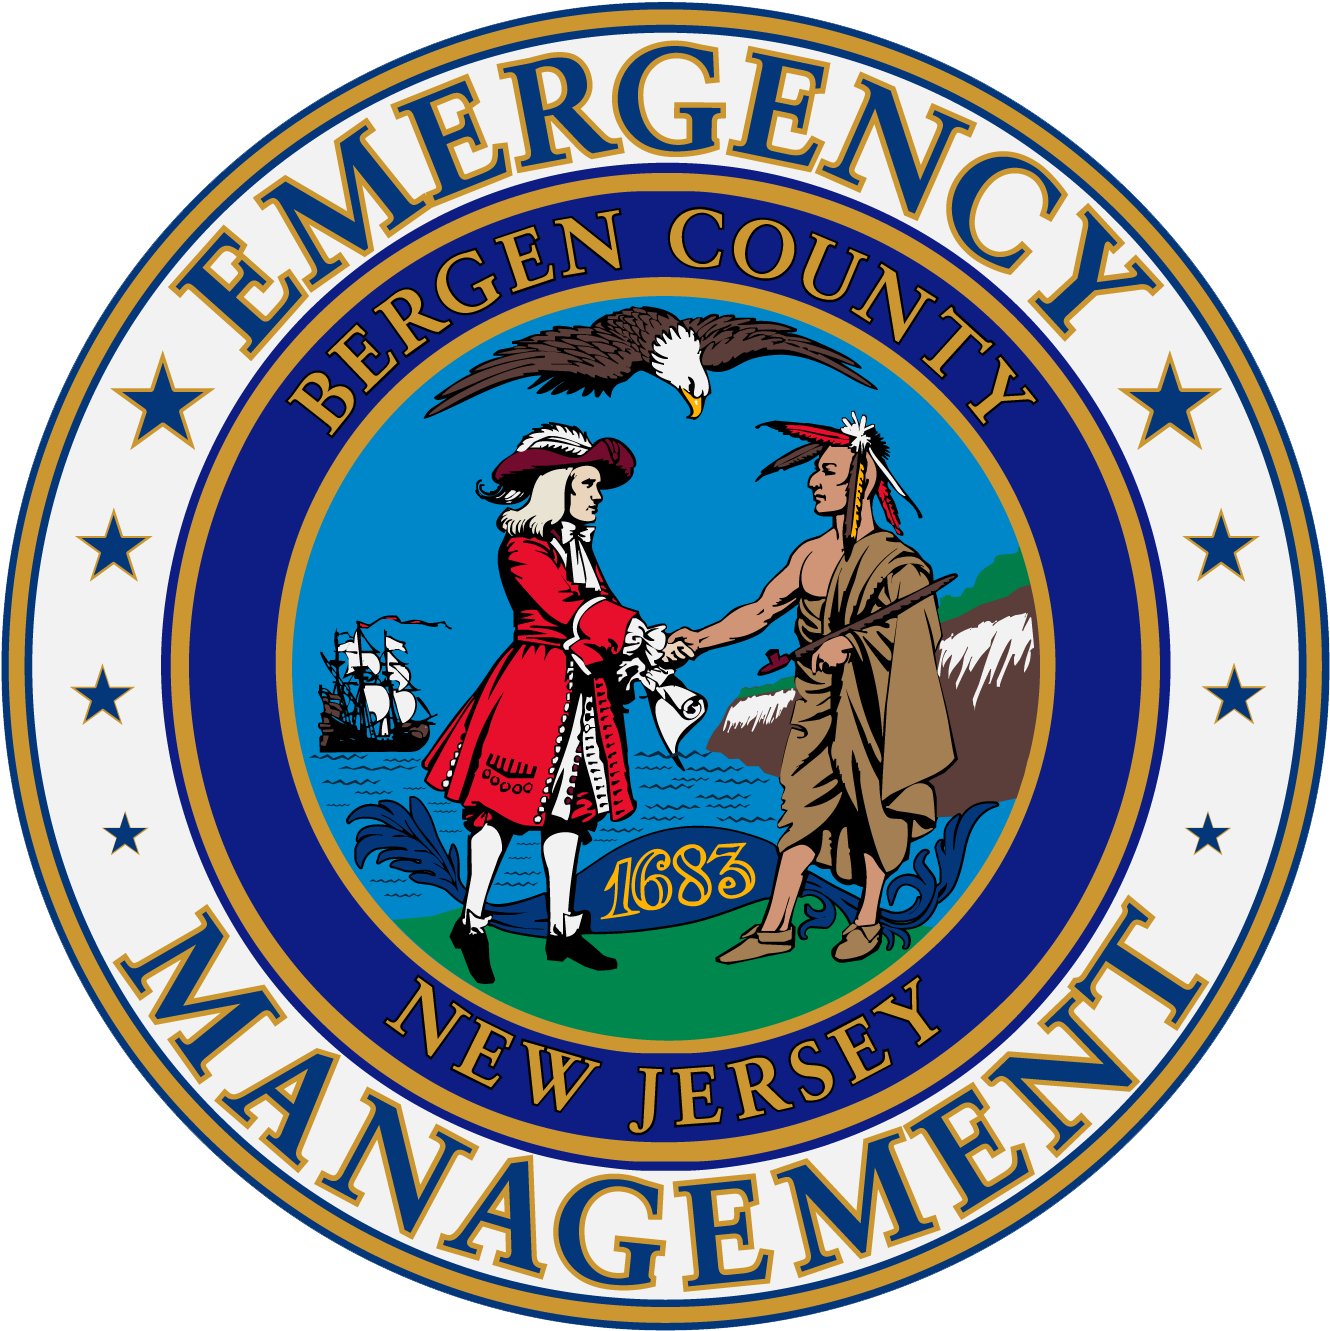 The Bergen County Office Of Emergency Management Is - Bergen County, New Jersey (1350x1342)